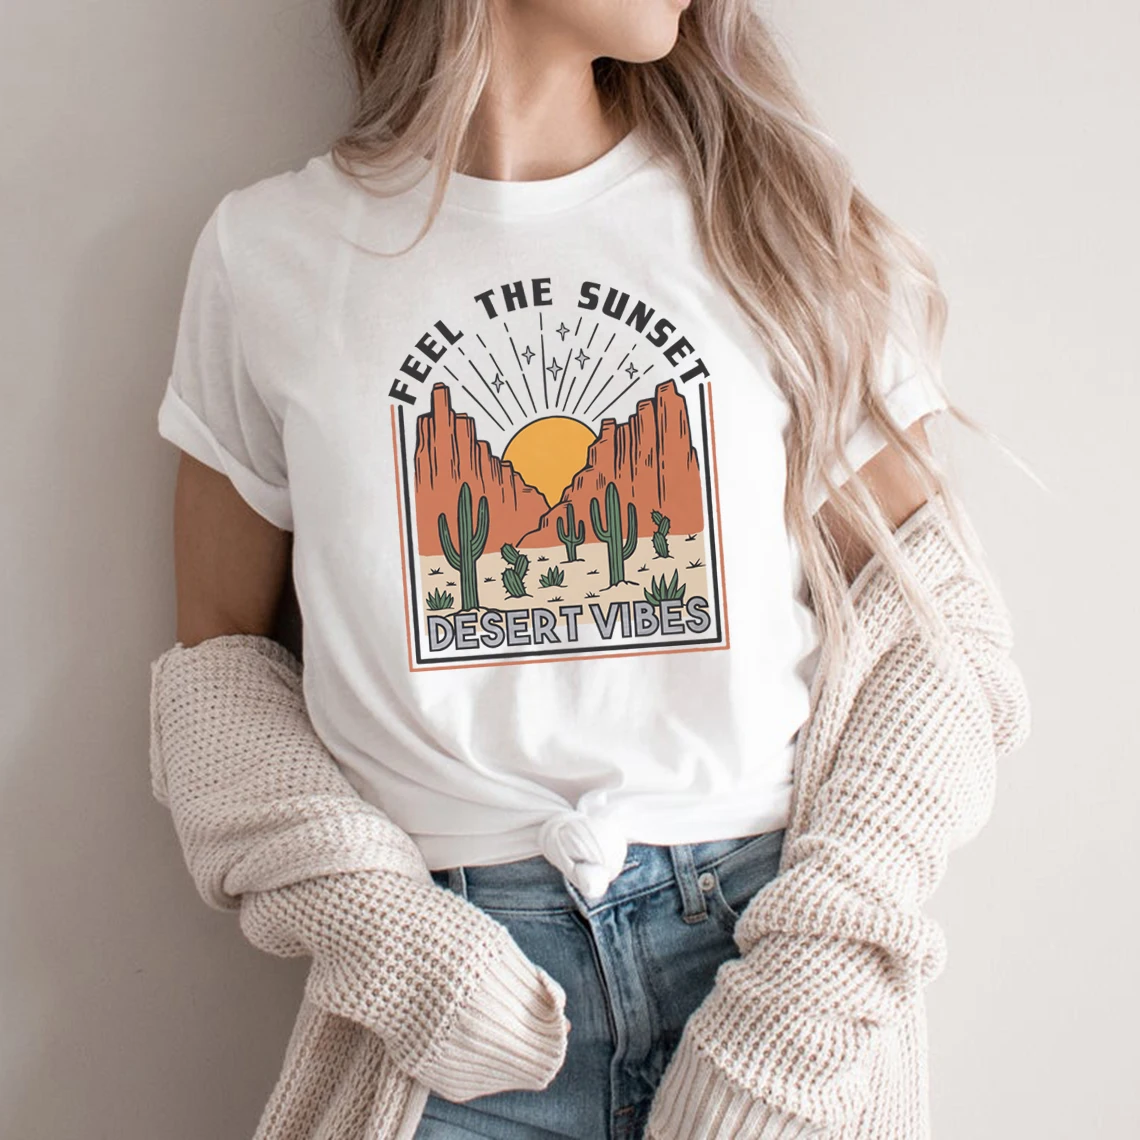 

Desert Vibes - Southwestern Themed T Shirt Hiking Tees Outdoor Shirts Wilderness Graphic Tee Cool Outdoors Print Tshirt Unisex